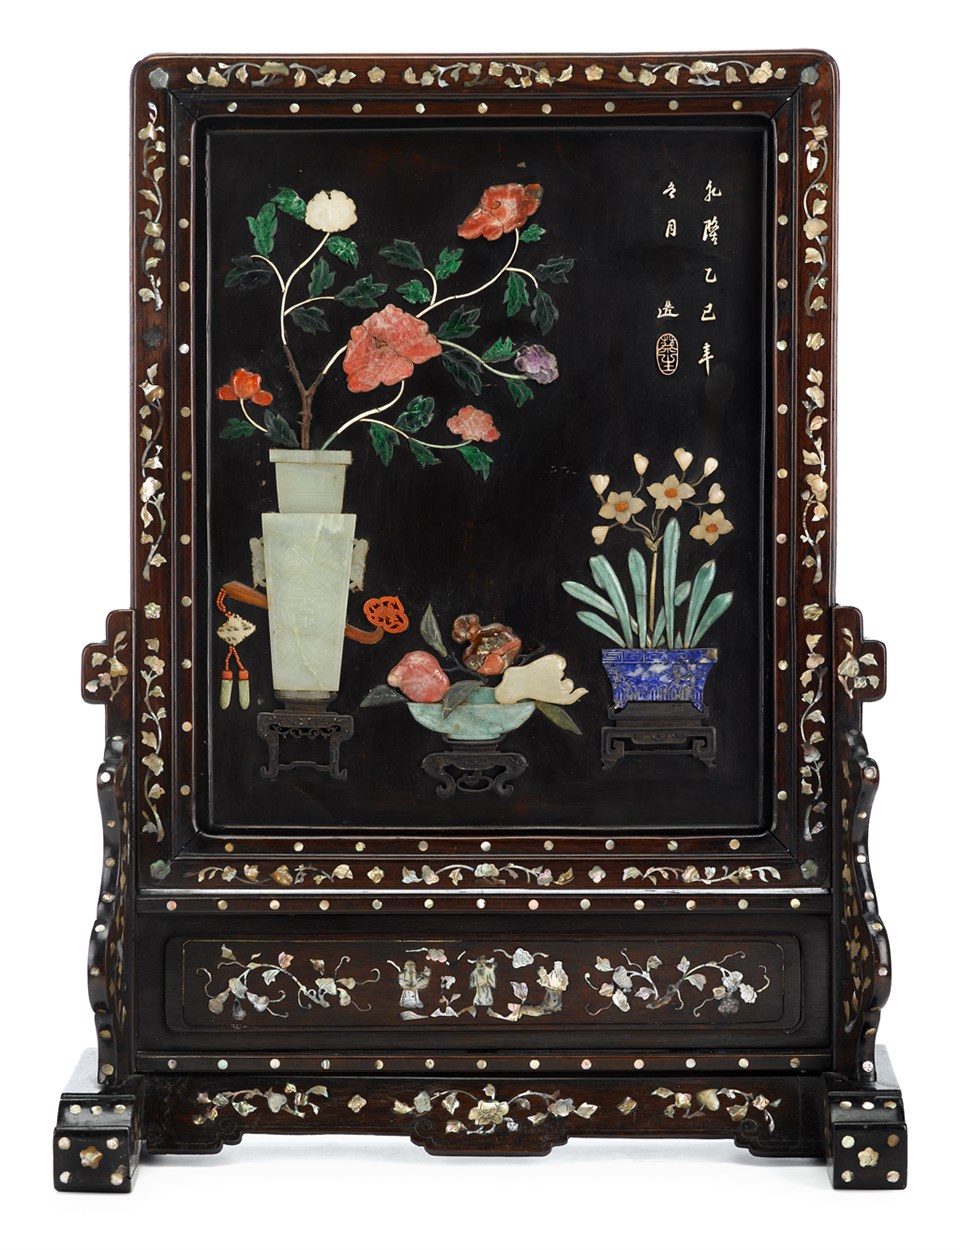 Lot 90 - Tall Chinese mother-of-pearl inlaid hardwood and applied lacquer table sceeen